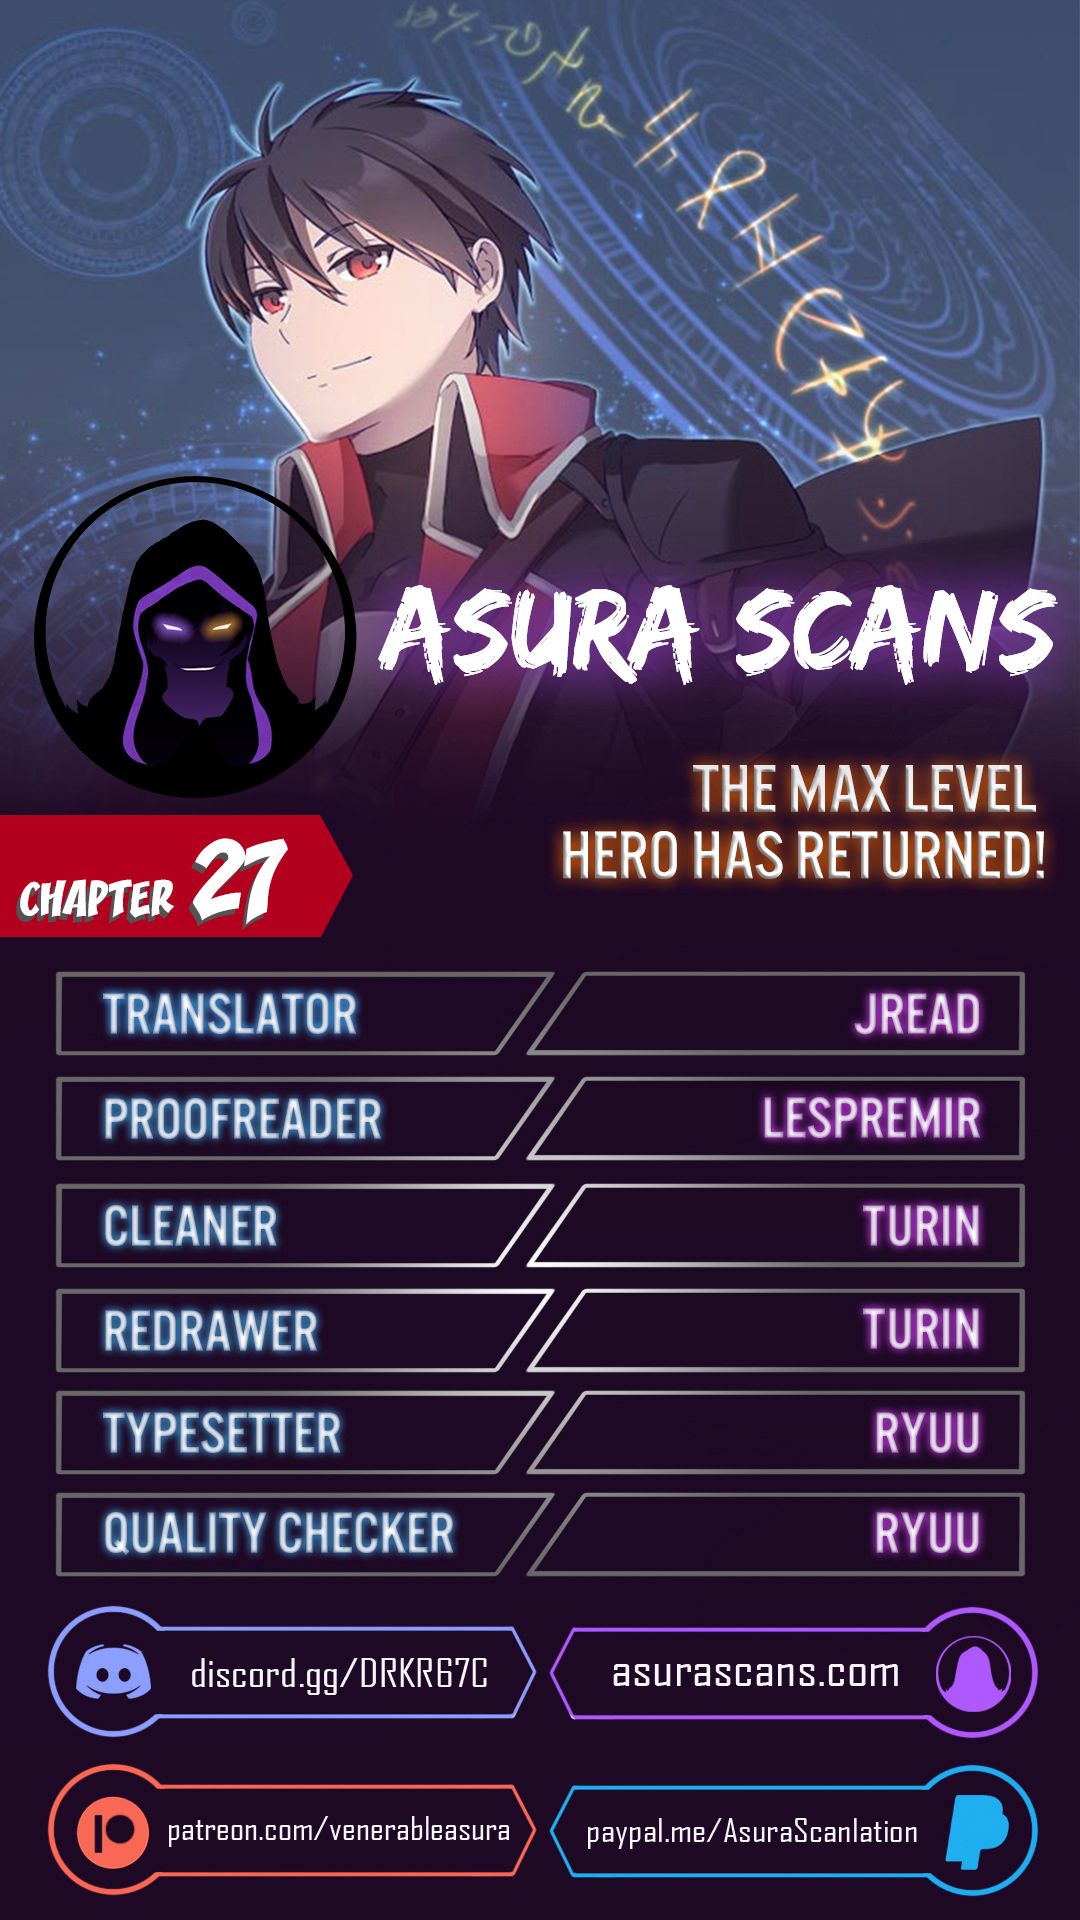 The MAX leveled hero will return! Chapter 27